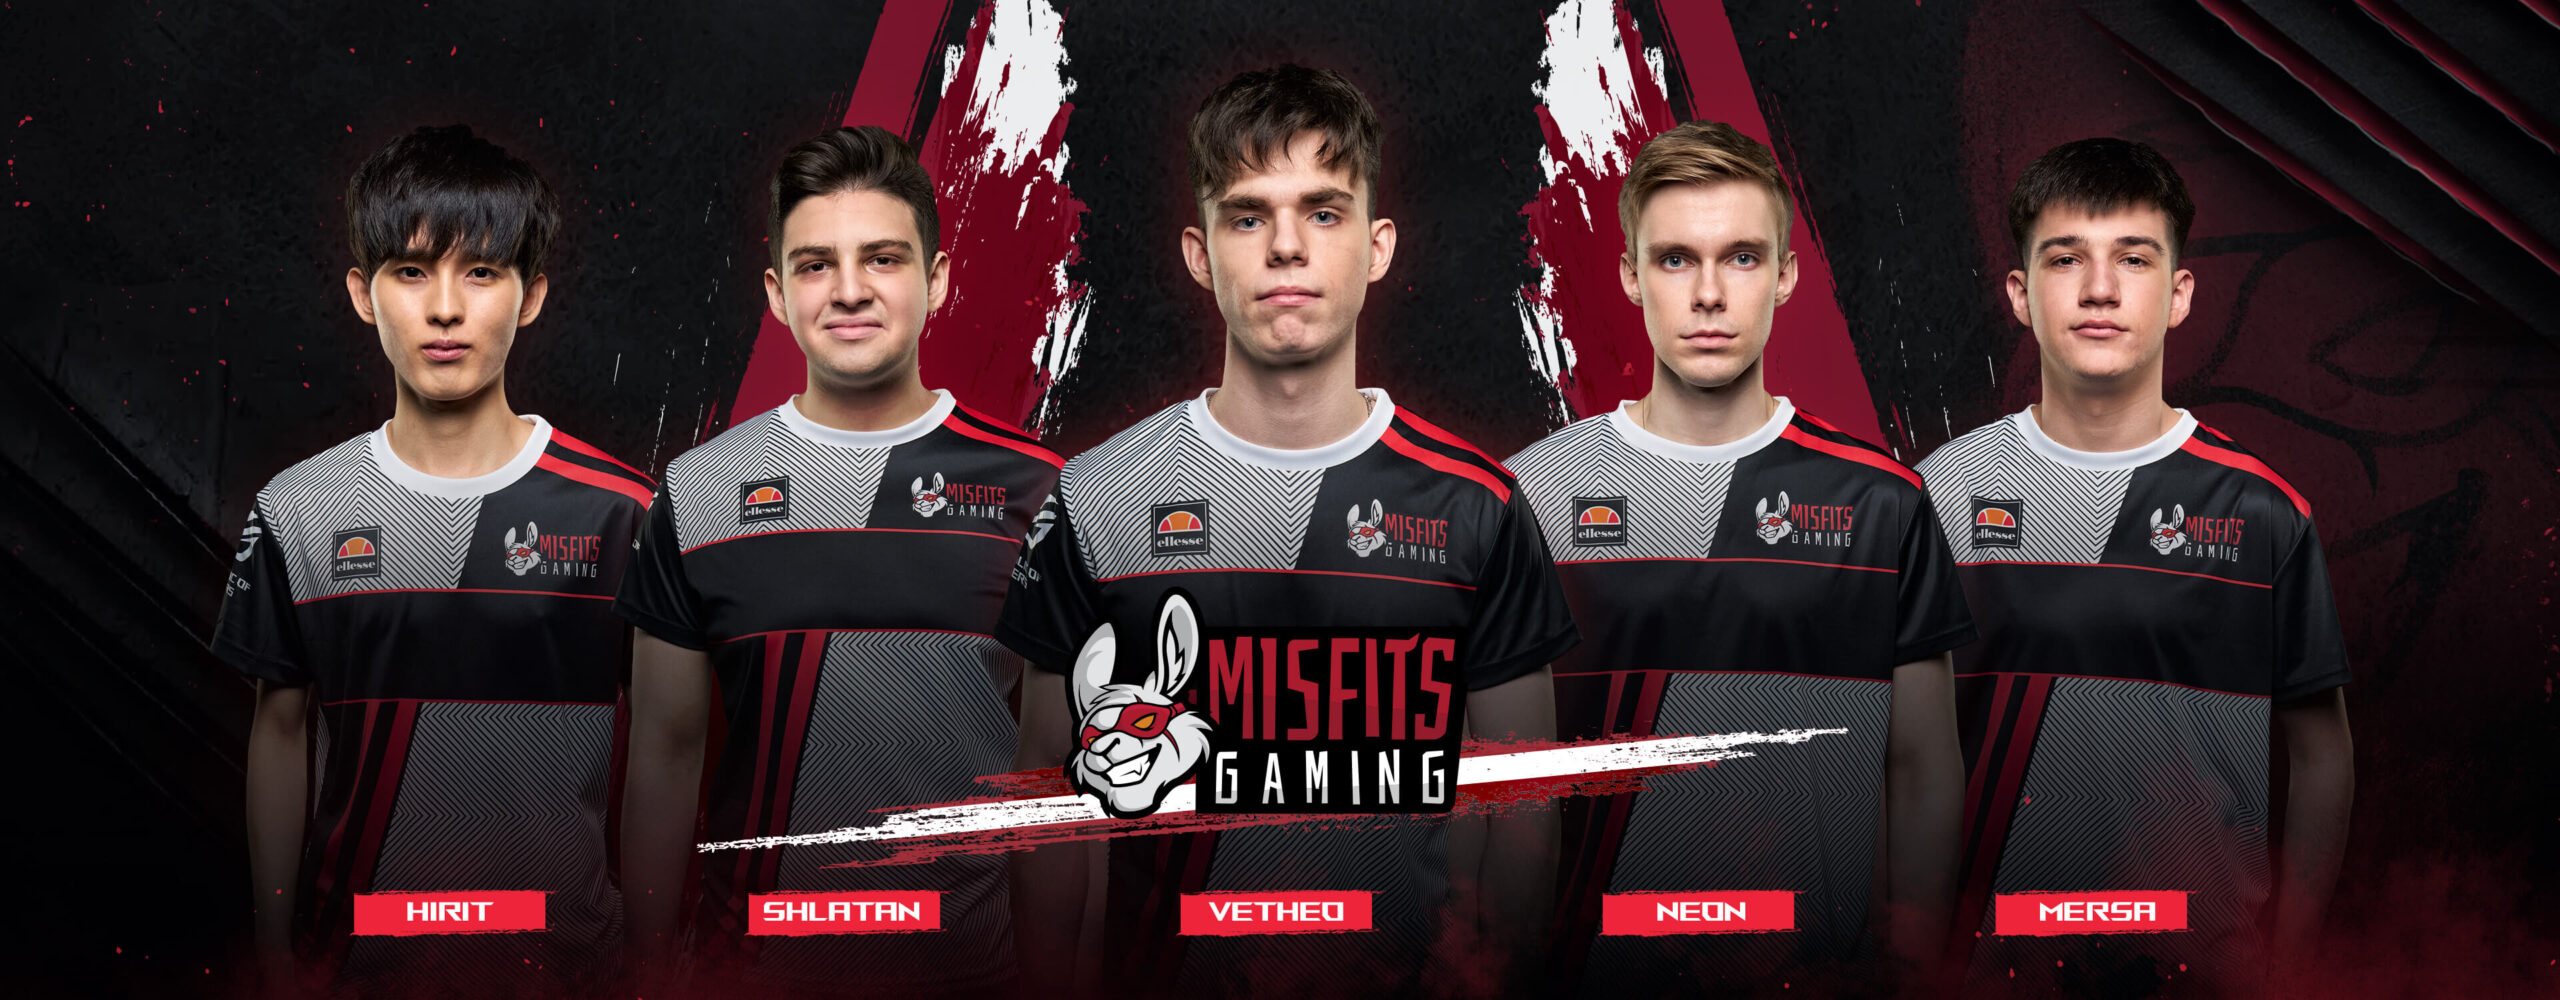 misfits gaming scaled